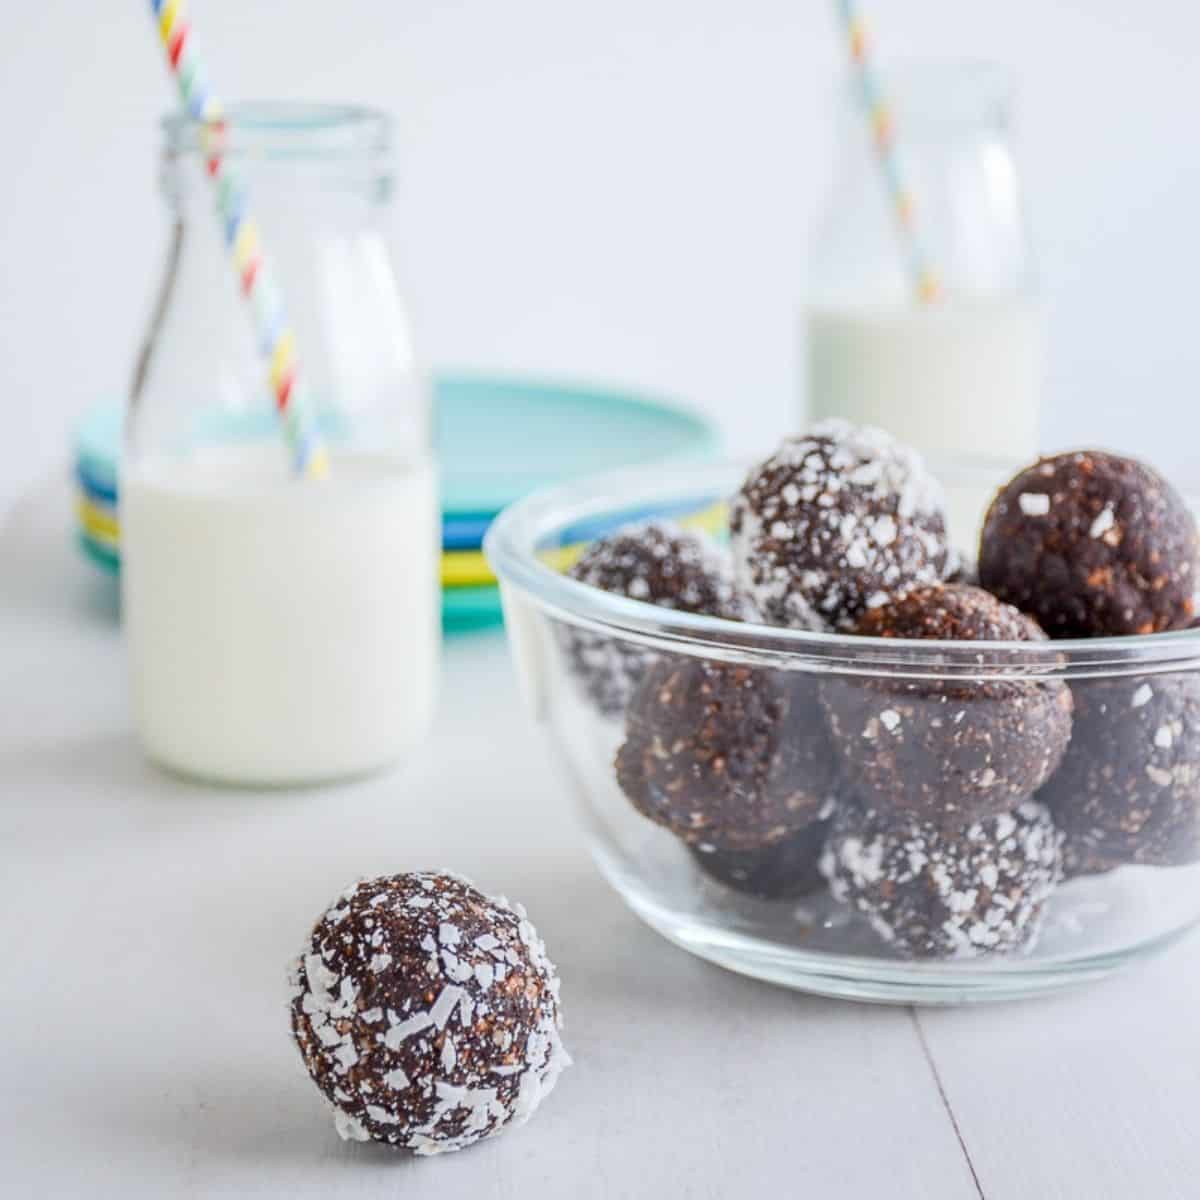 Chocolate bliss balls in a glass bowl with a bottle of milk.